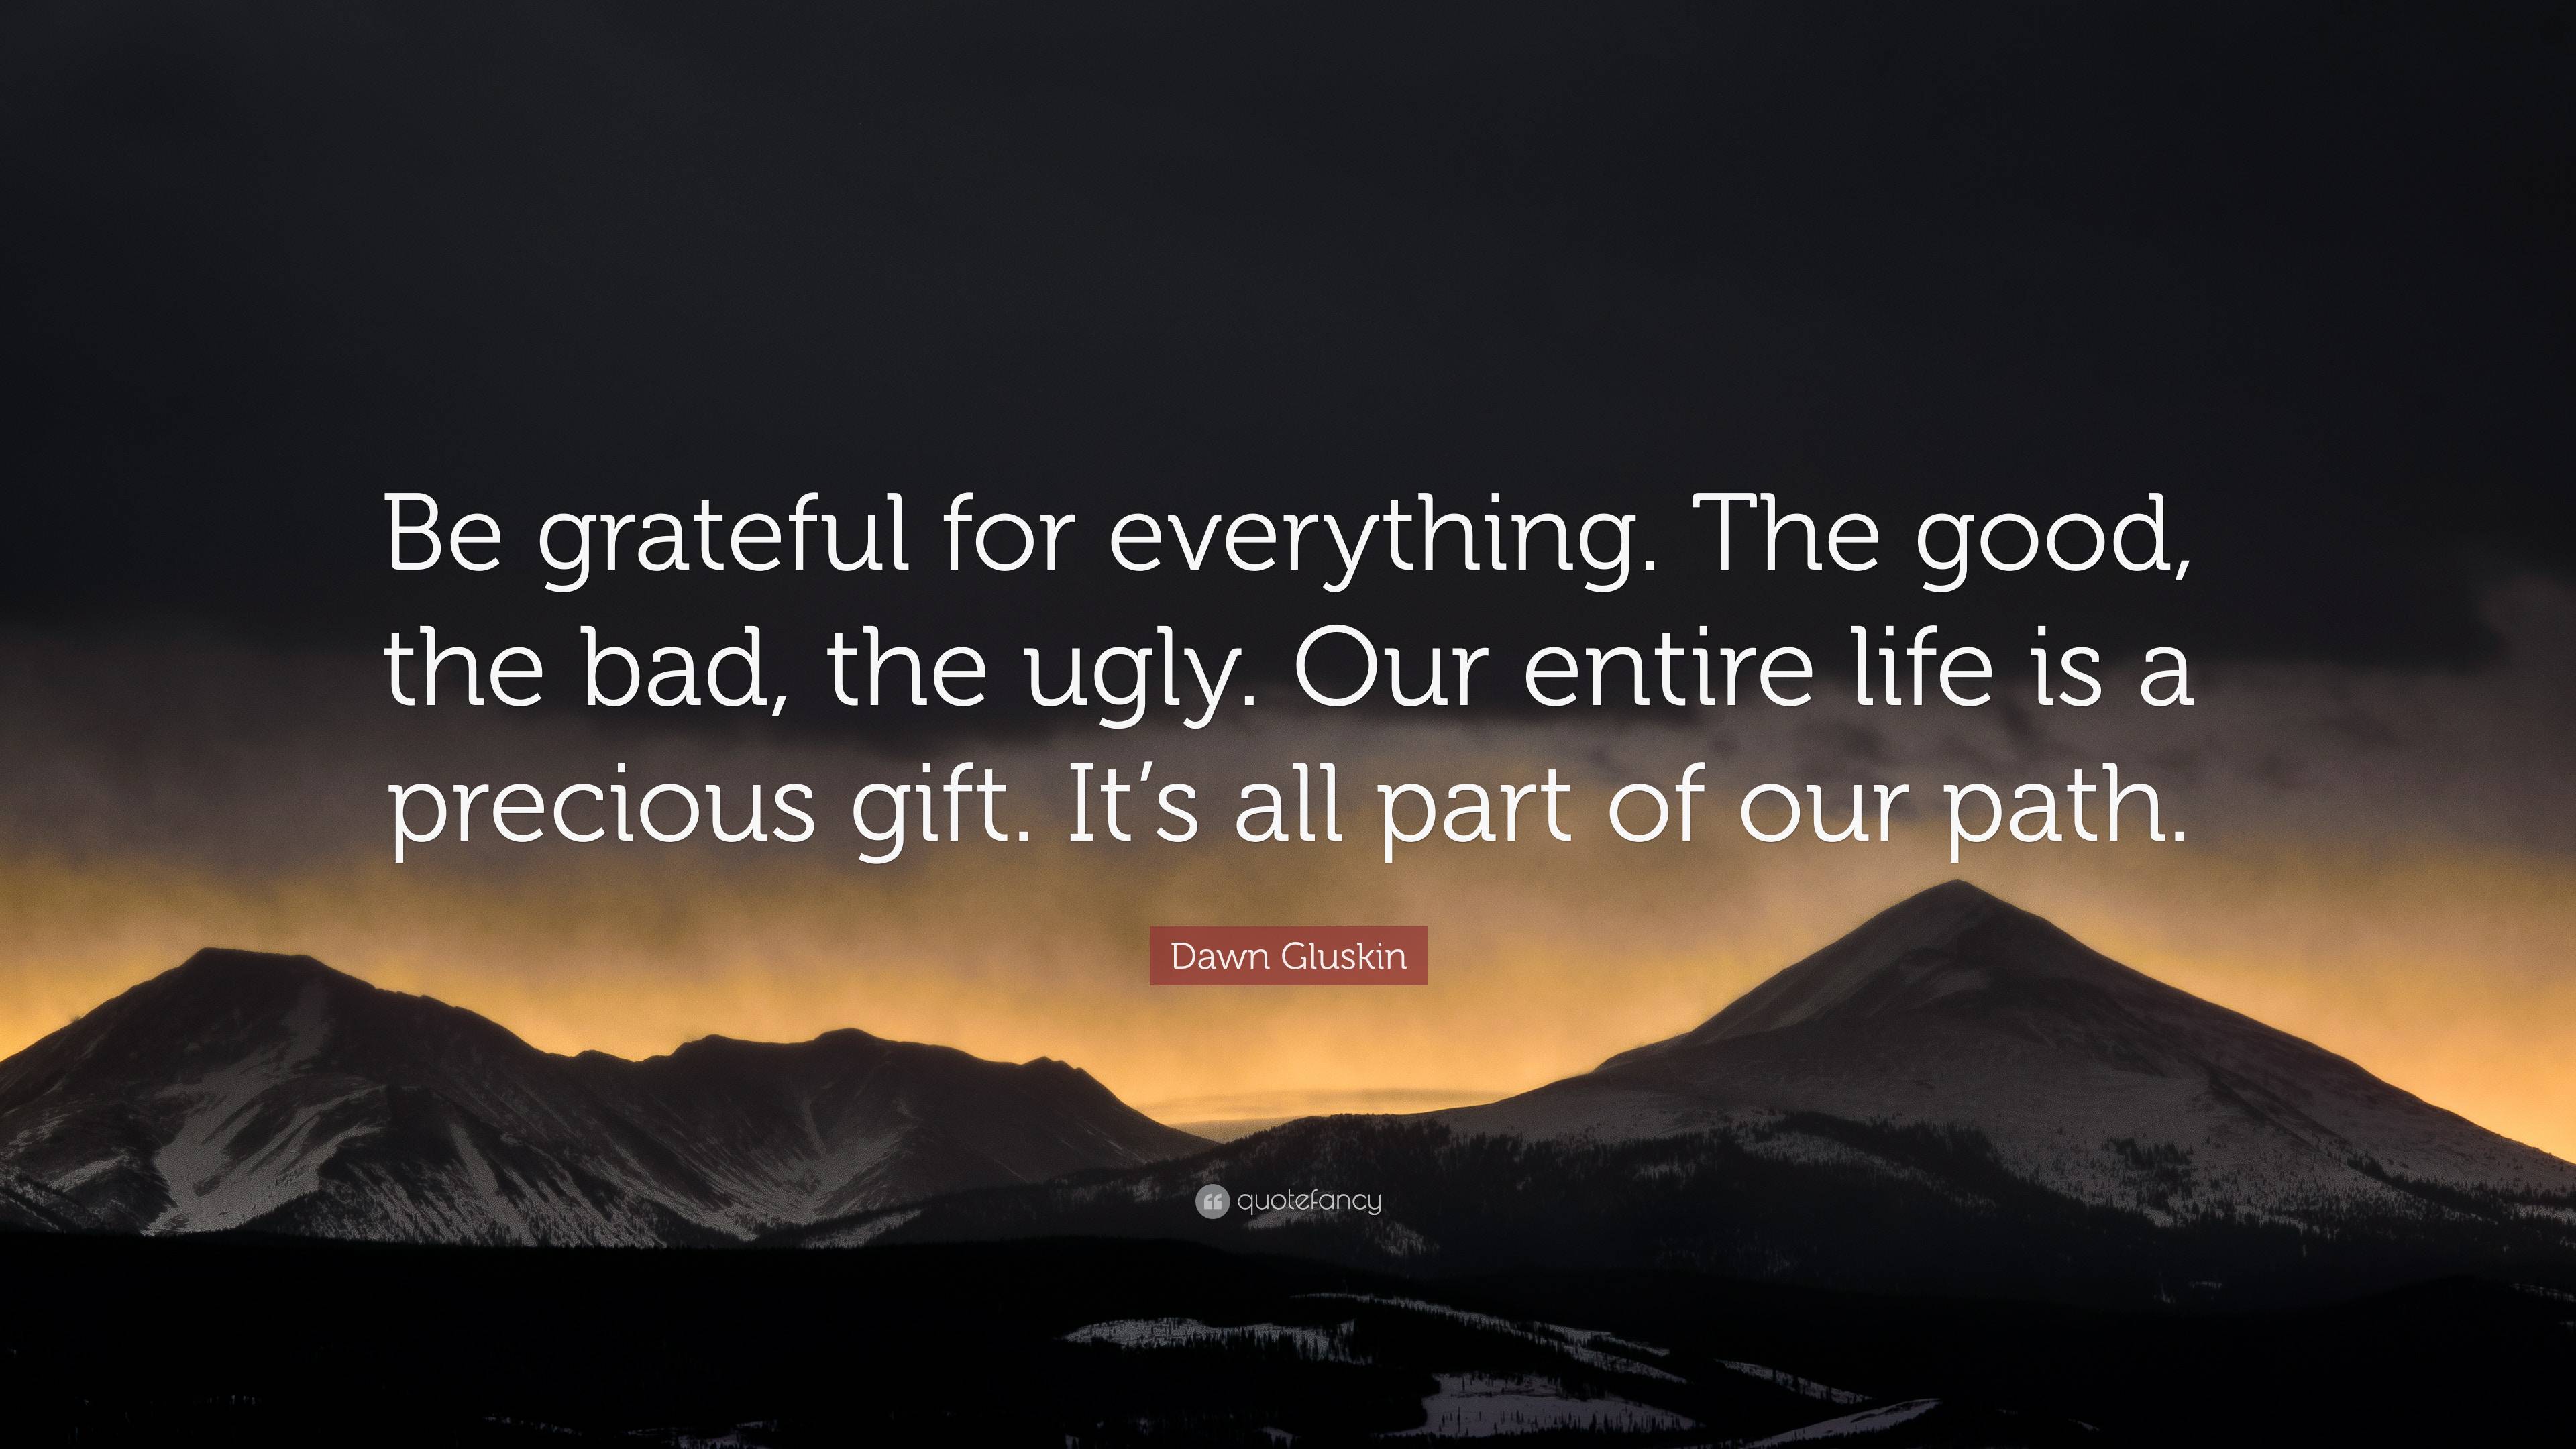 Be Grateful & Everything Will be Great.